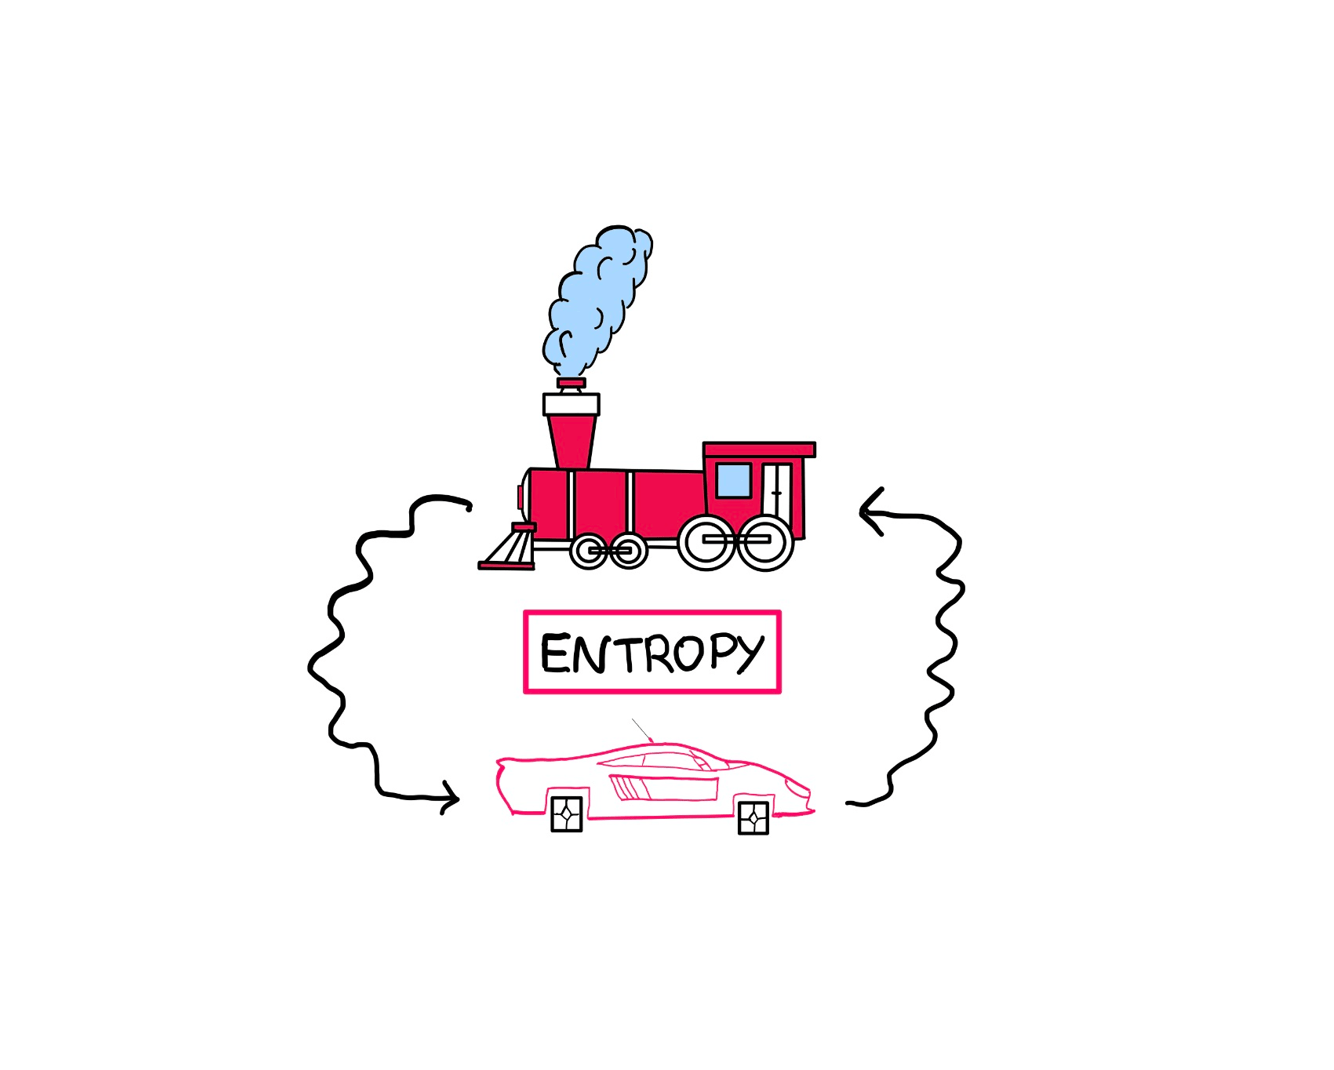 Perpetual Motion Machines: The Elusive Pursuit of Infinite Energy - An illustration showing a cute-looking steam engine on top and a modern-looking sports car with square wheels below. The word "Entropy" is written in a block in between these two figures.